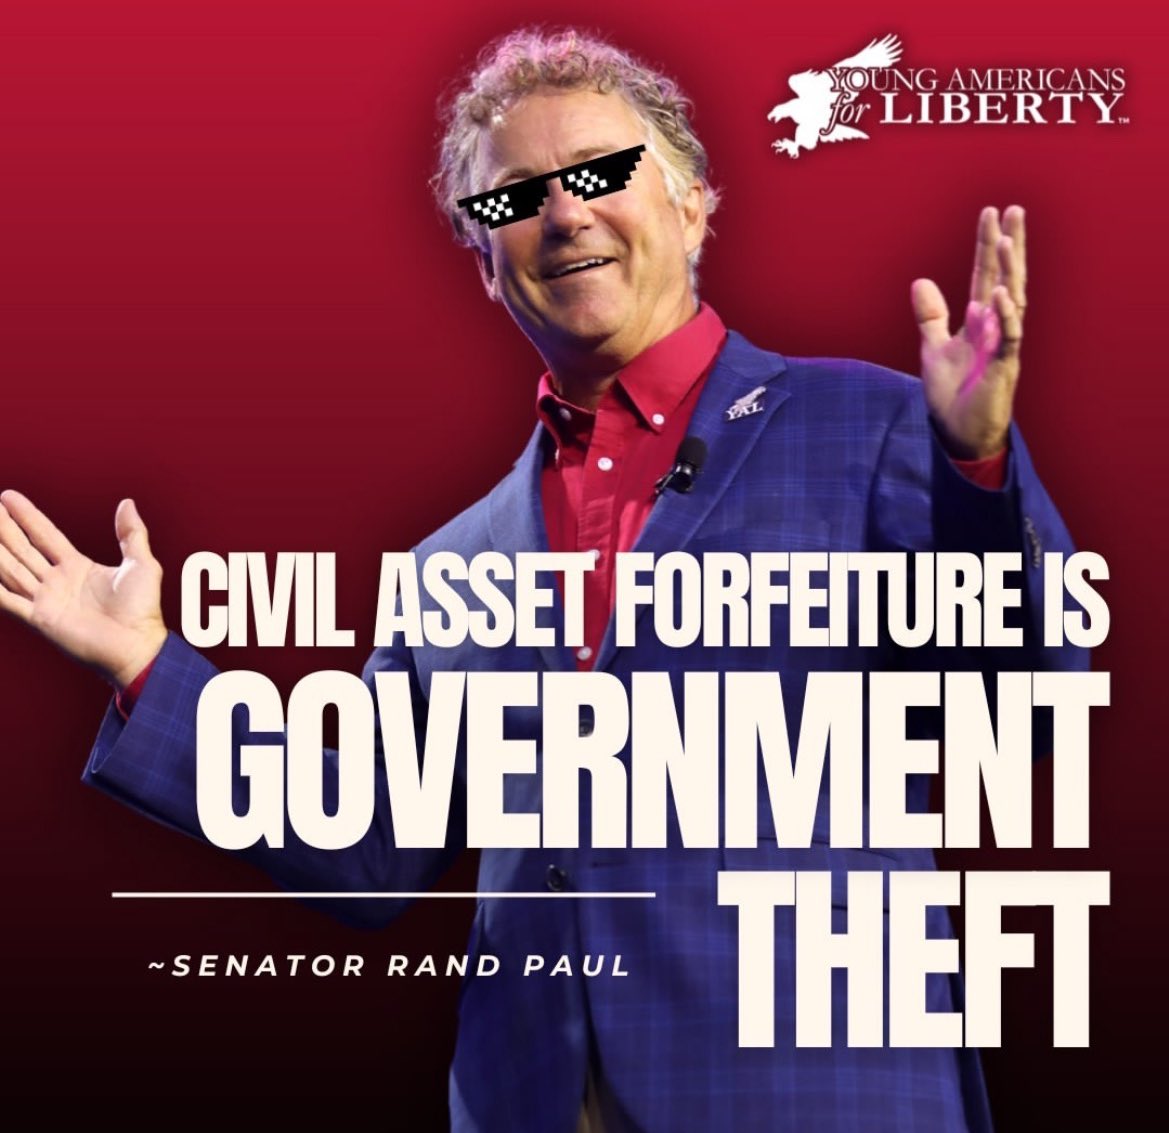 What’s your opinion of civil asset forfeiture?
#CivilAssetForfeiture #government #theft